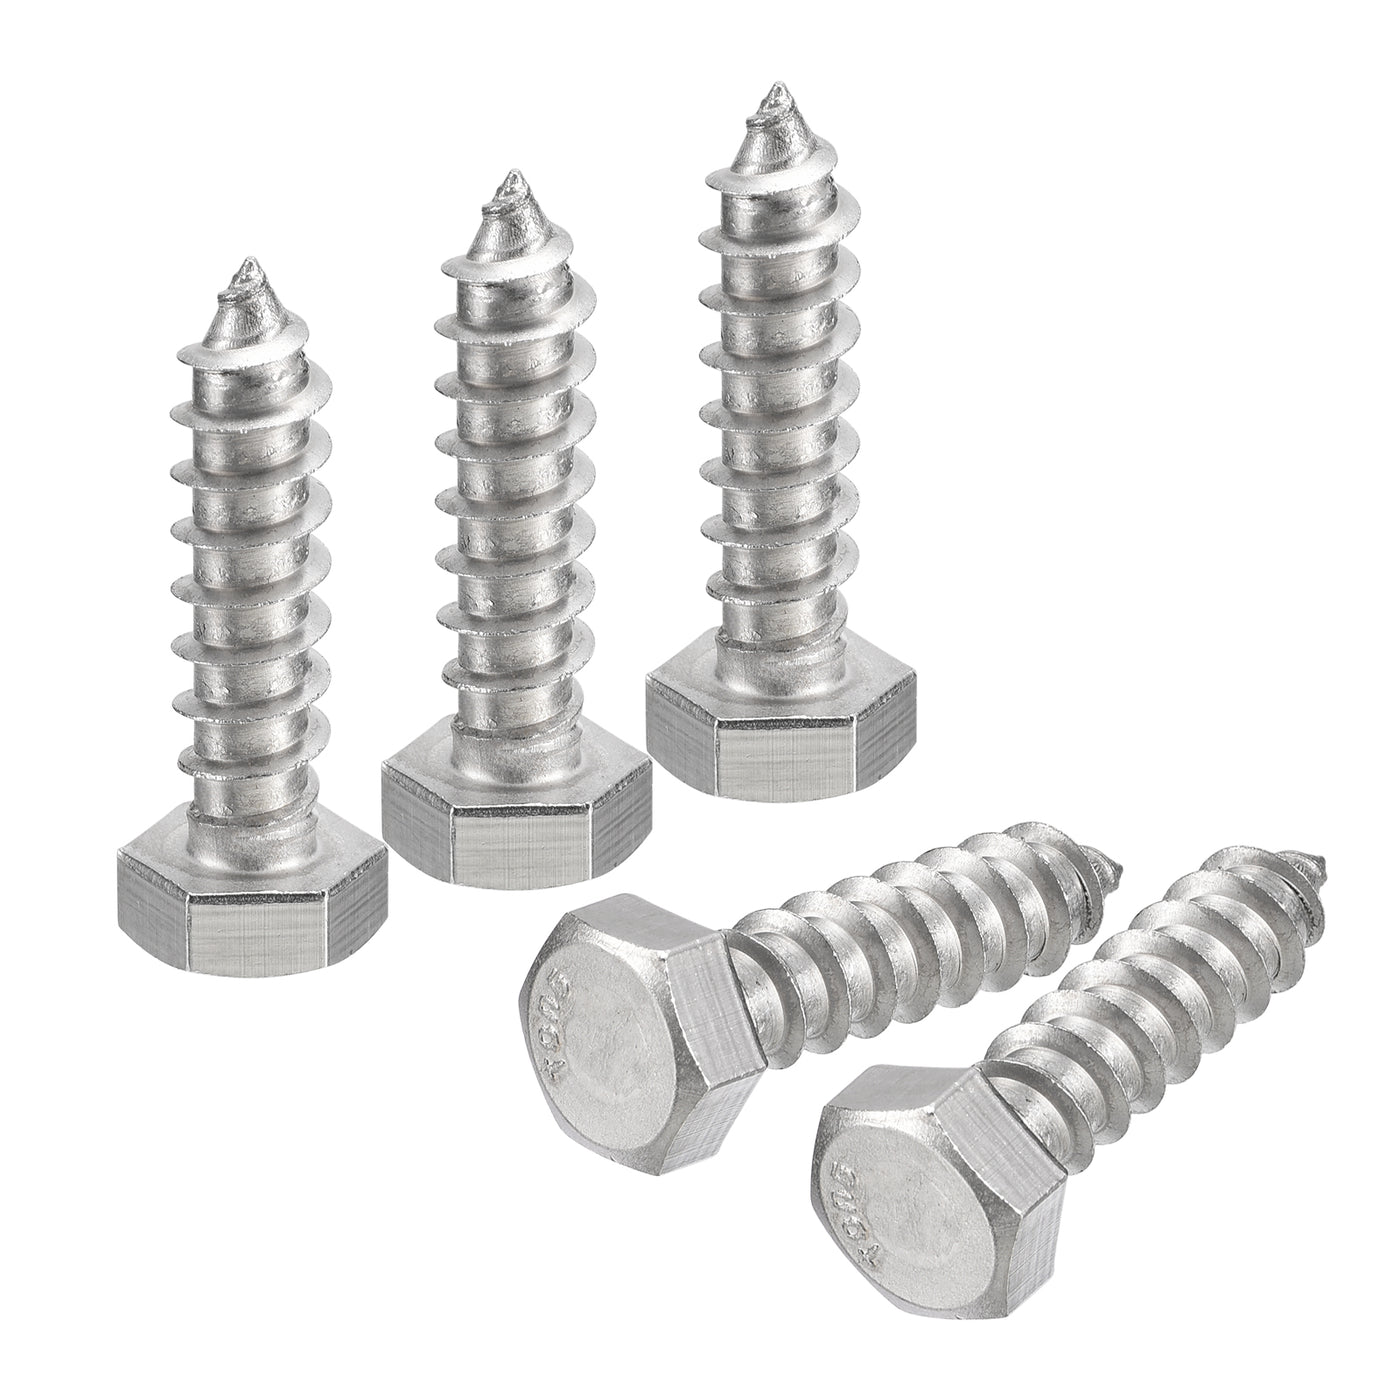 uxcell Uxcell Hex Head Lag Screws Bolts, 5pcs 3/8" x 1-1/2" 304 Stainless Steel Wood Screws